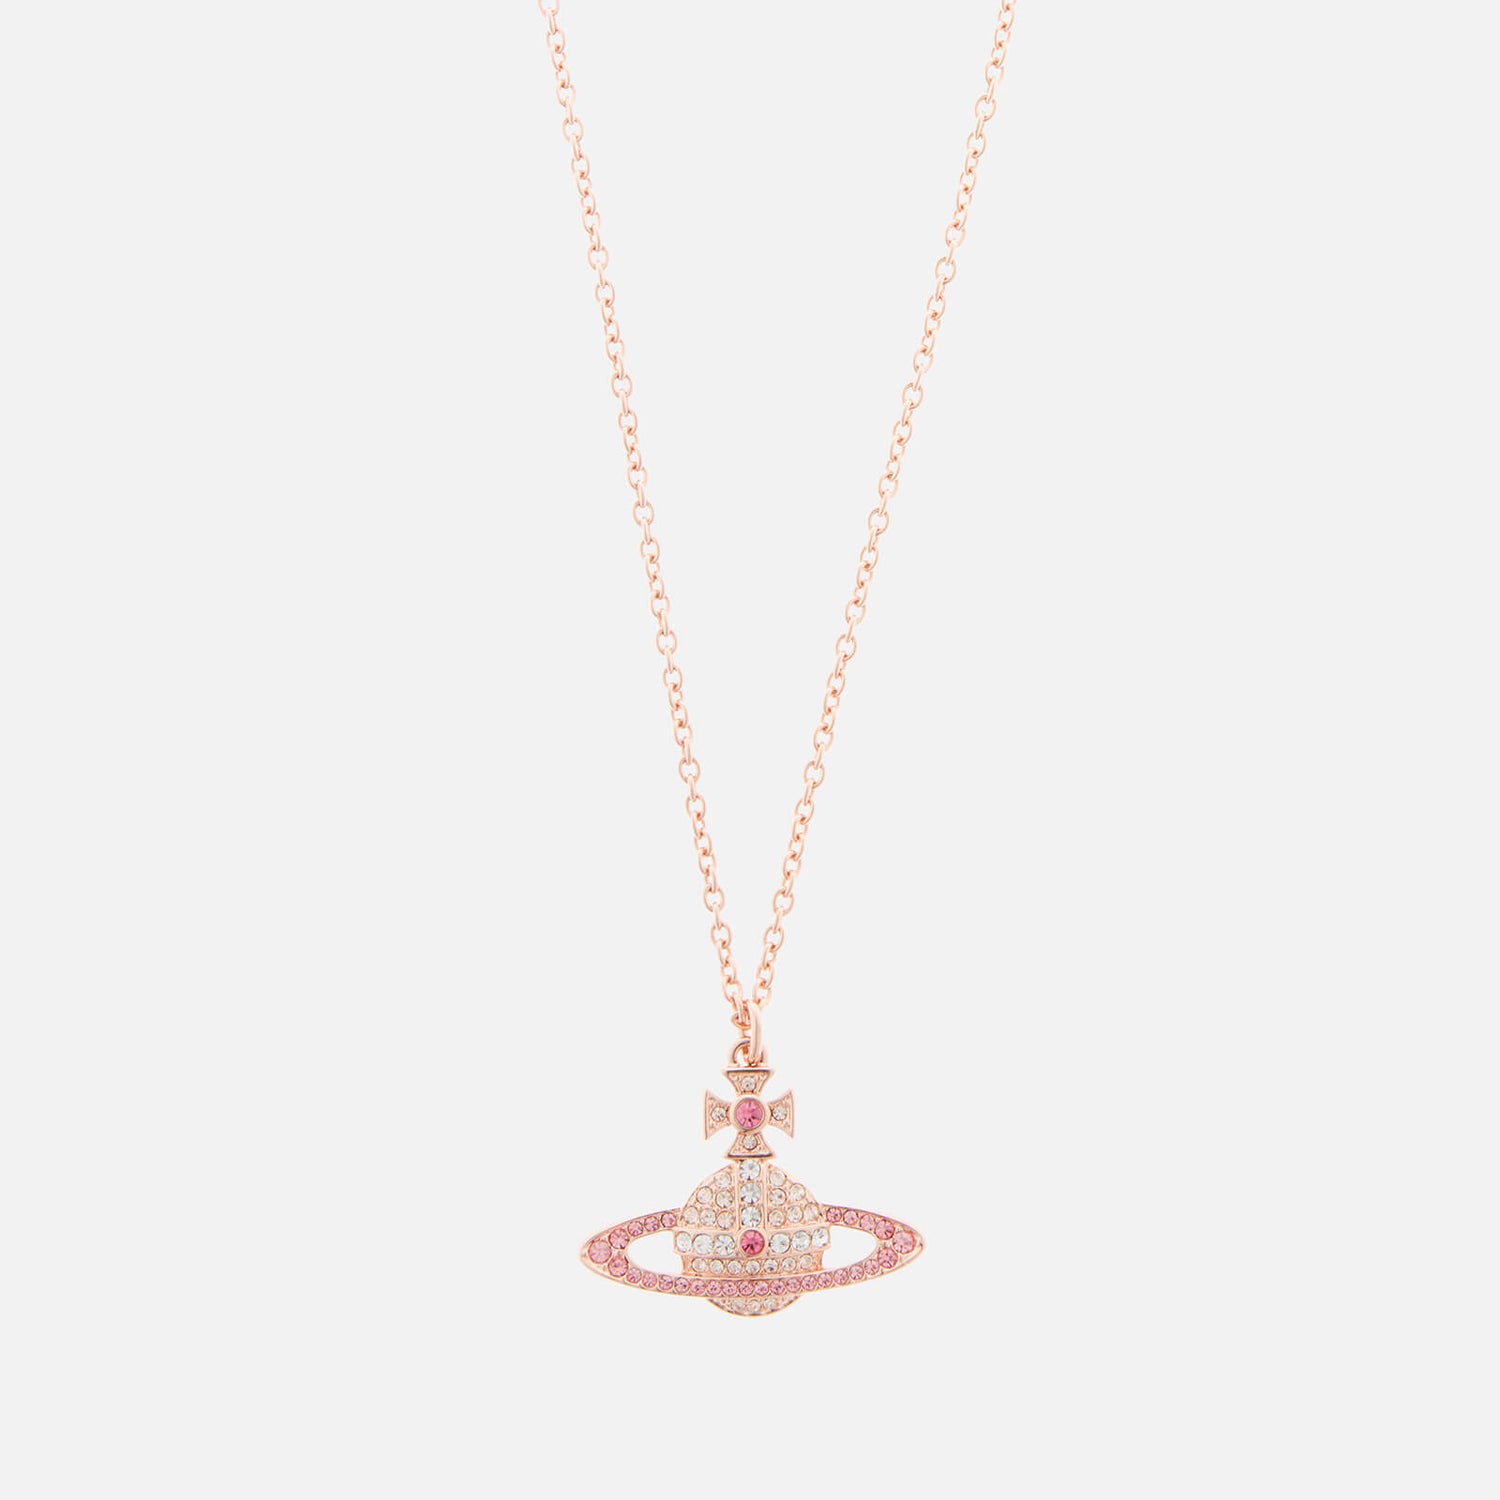 Vivienne Westwood Kika Rose Gold-Tone and Crystal Necklace